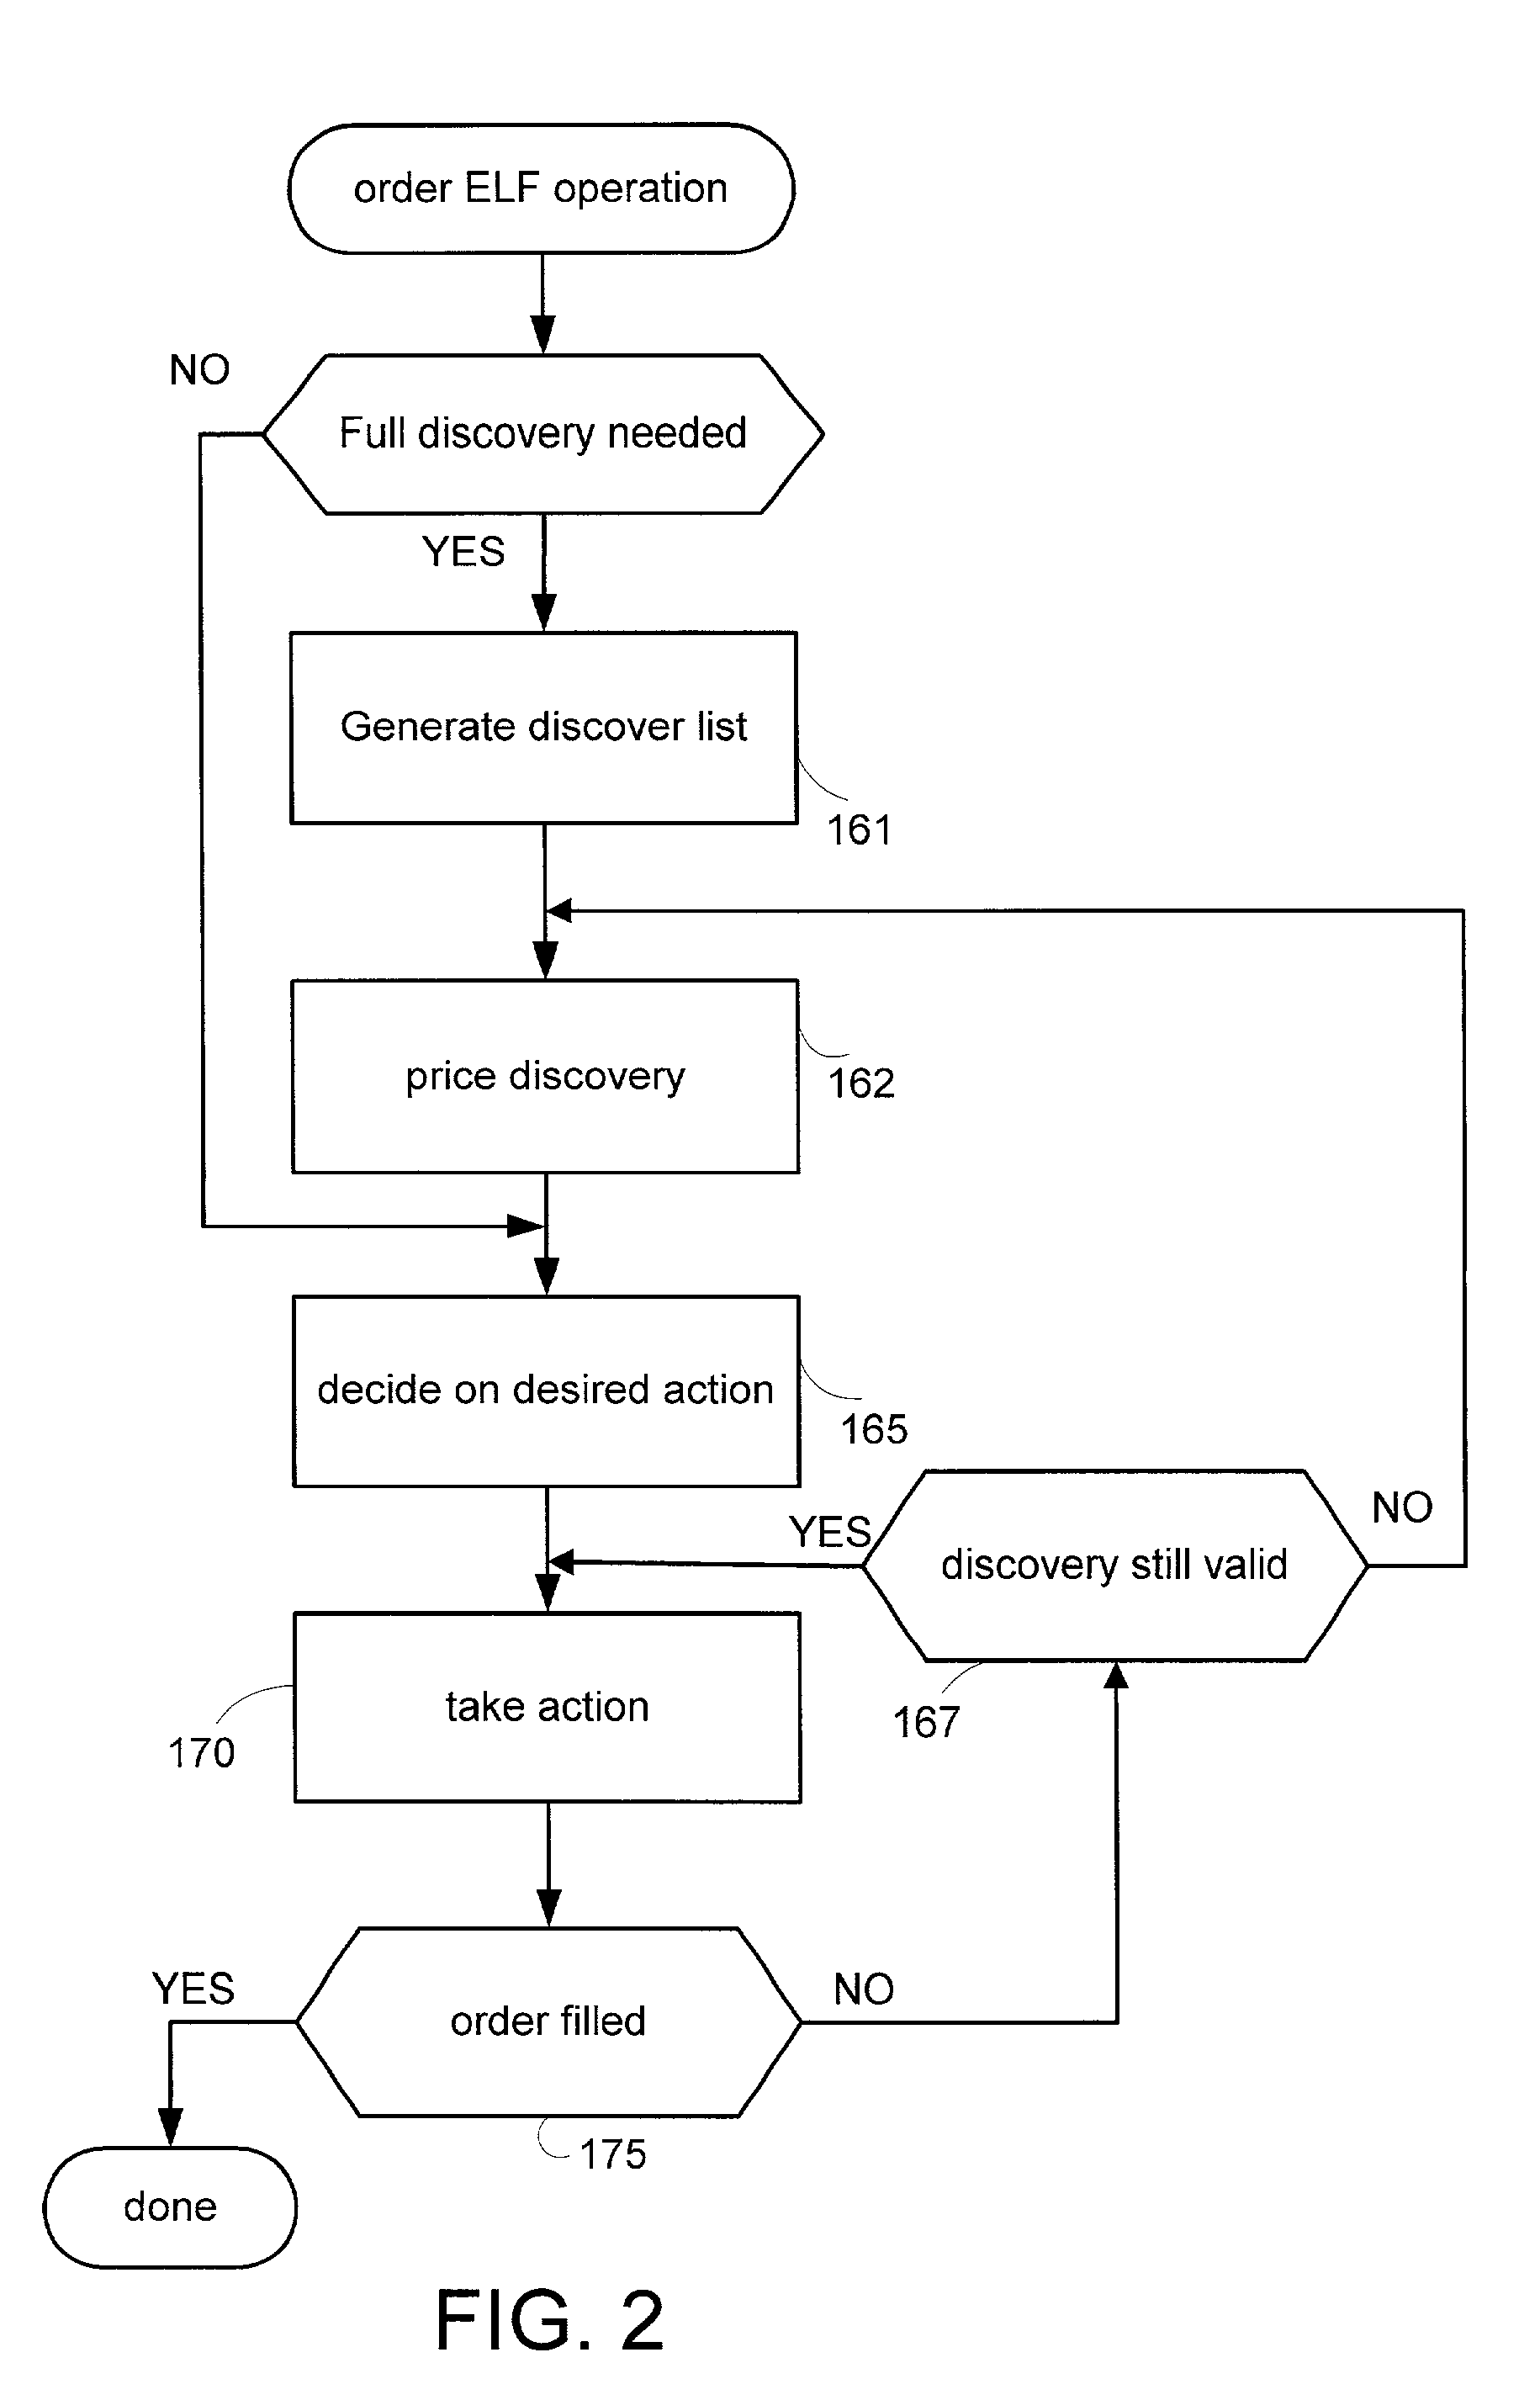 Automated trial order processing